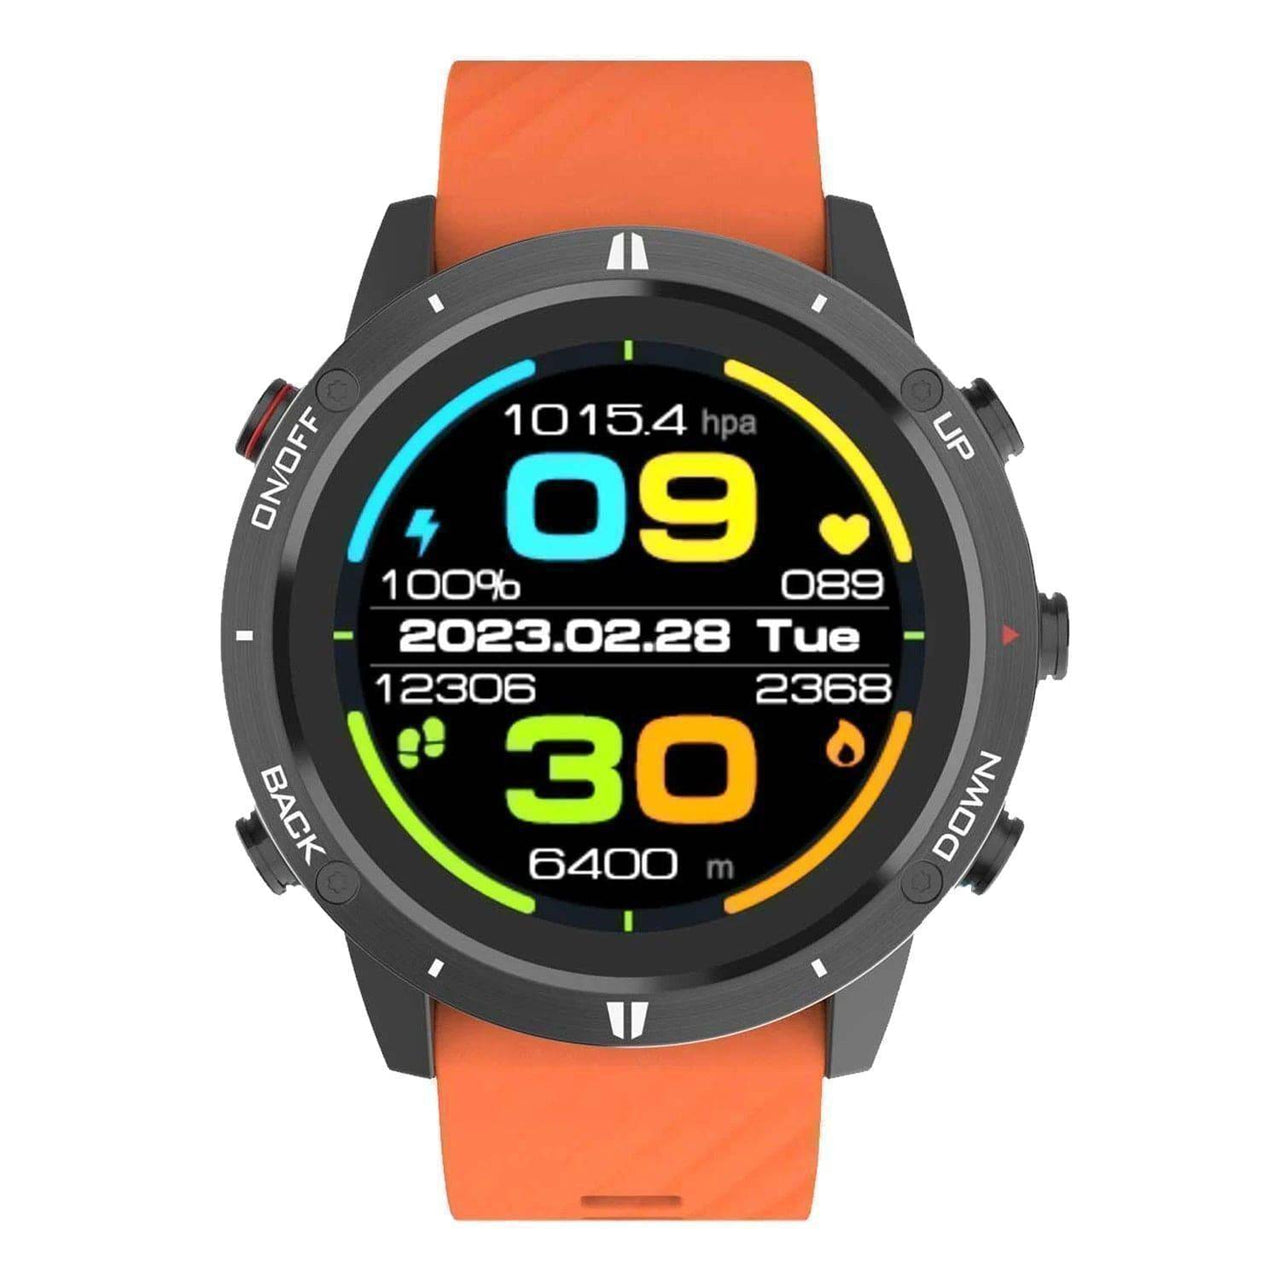 Survival Gears Depot Consumer Electronics Digital Sports Smart Watch with GPS Compass Altimeter Barometer Pedometer